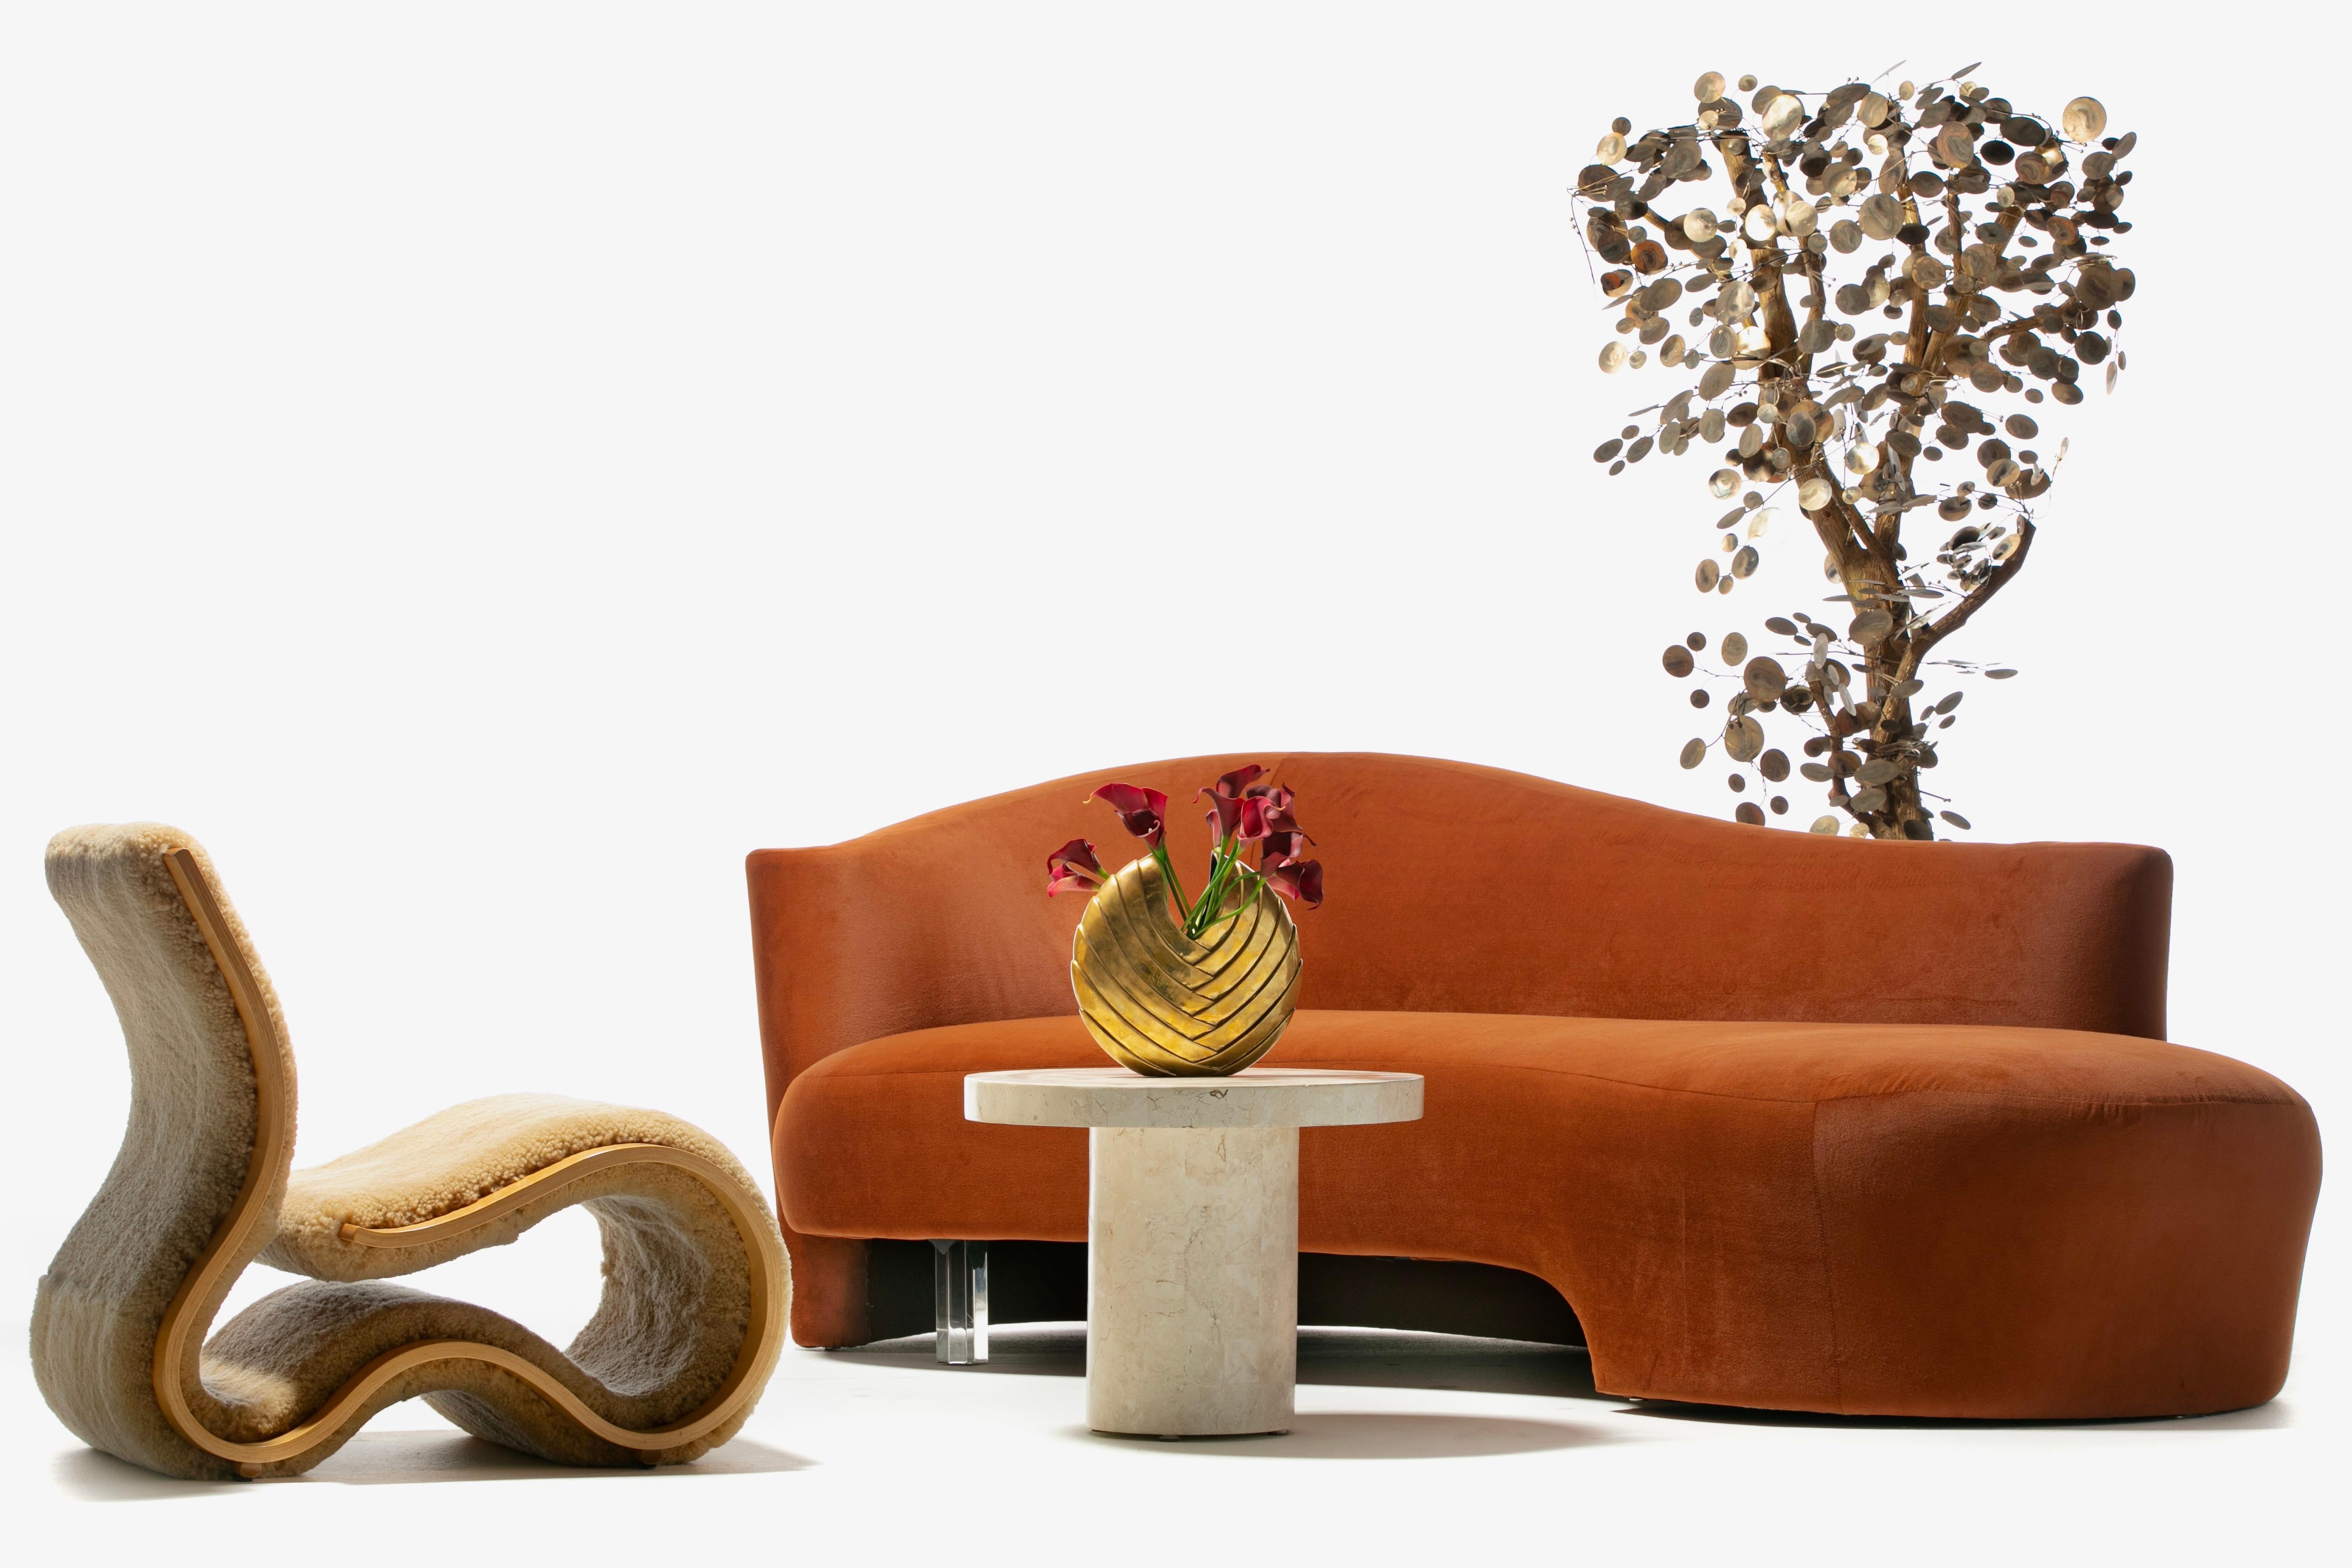 There's not a single straight line in this sexy Post Modern Serpentine Sofa upholstered in a rich terracotta velvet and made by Weiman. The look is Modern. High Art. Uber Sexy. Amorphous to the max, the silhouette curves from every angle. Unlike